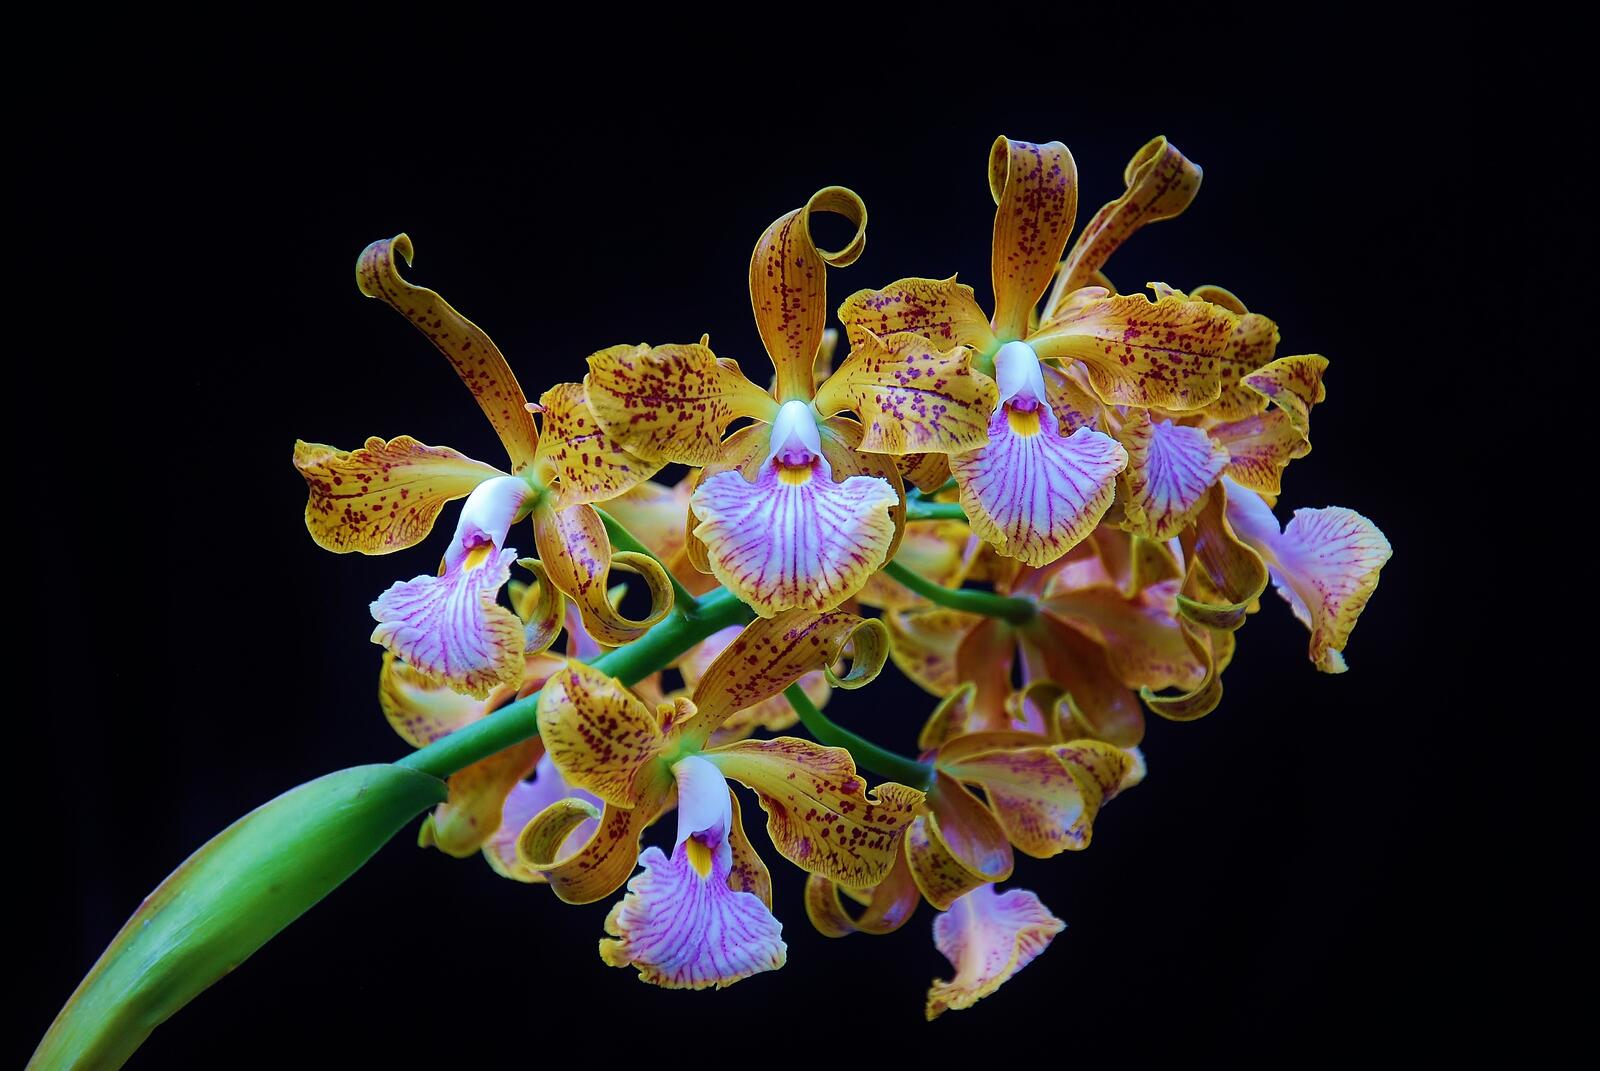 Wallpapers Orchid Orchid Cattleya velutina flowers on the desktop